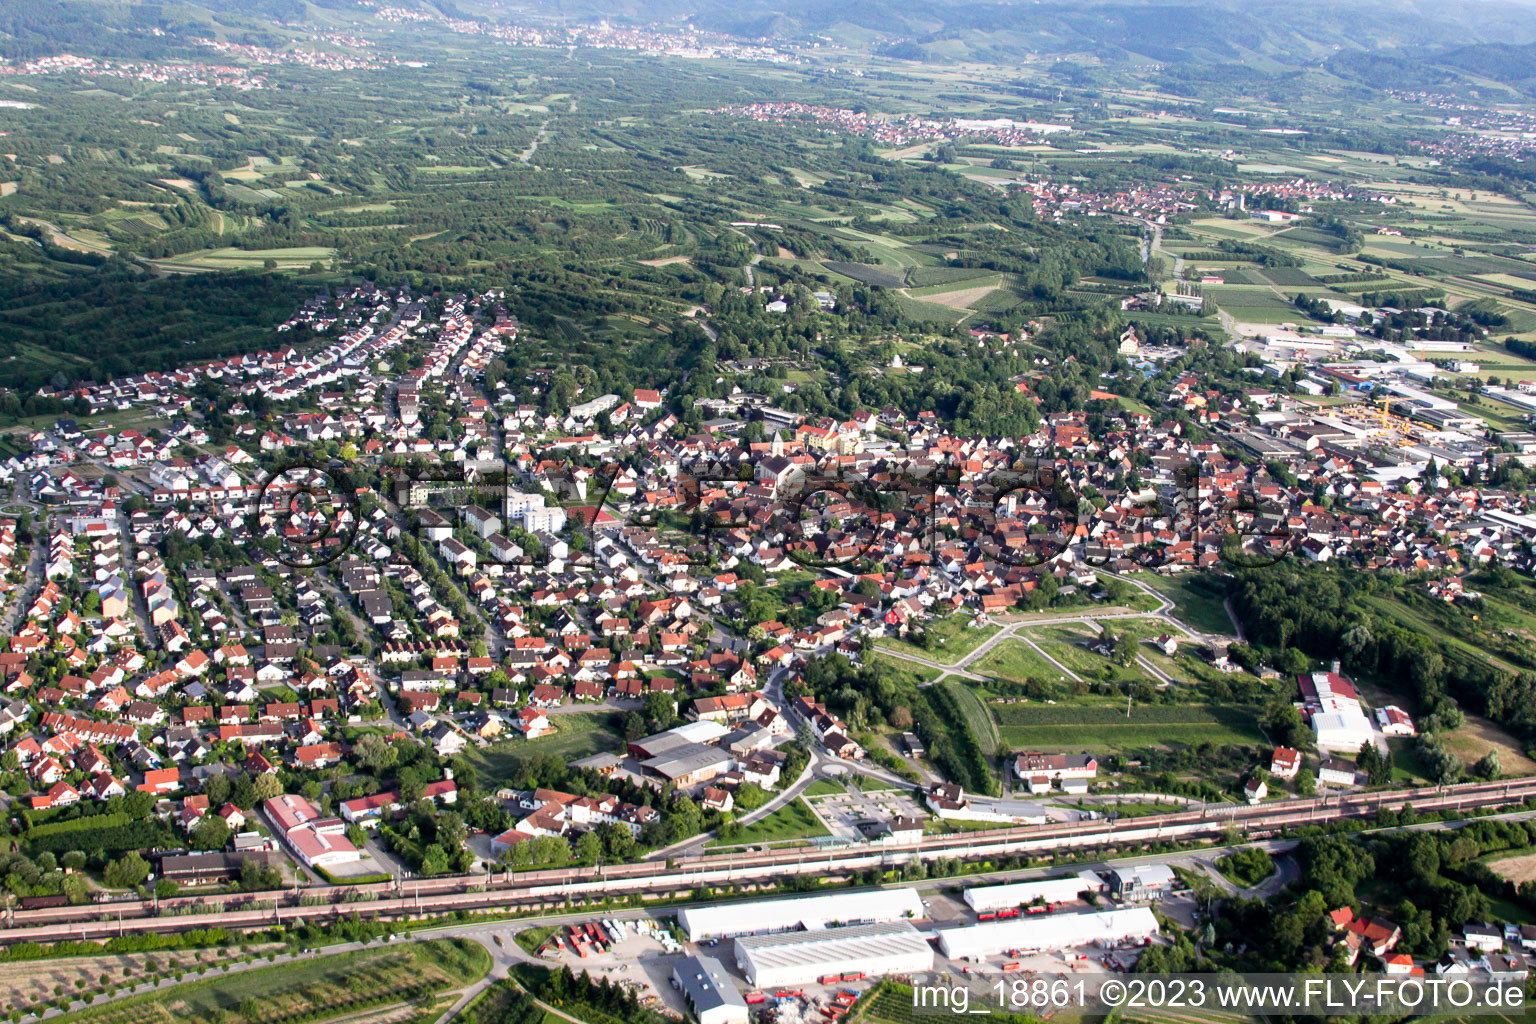 Renchen in the state Baden-Wuerttemberg, Germany seen from above